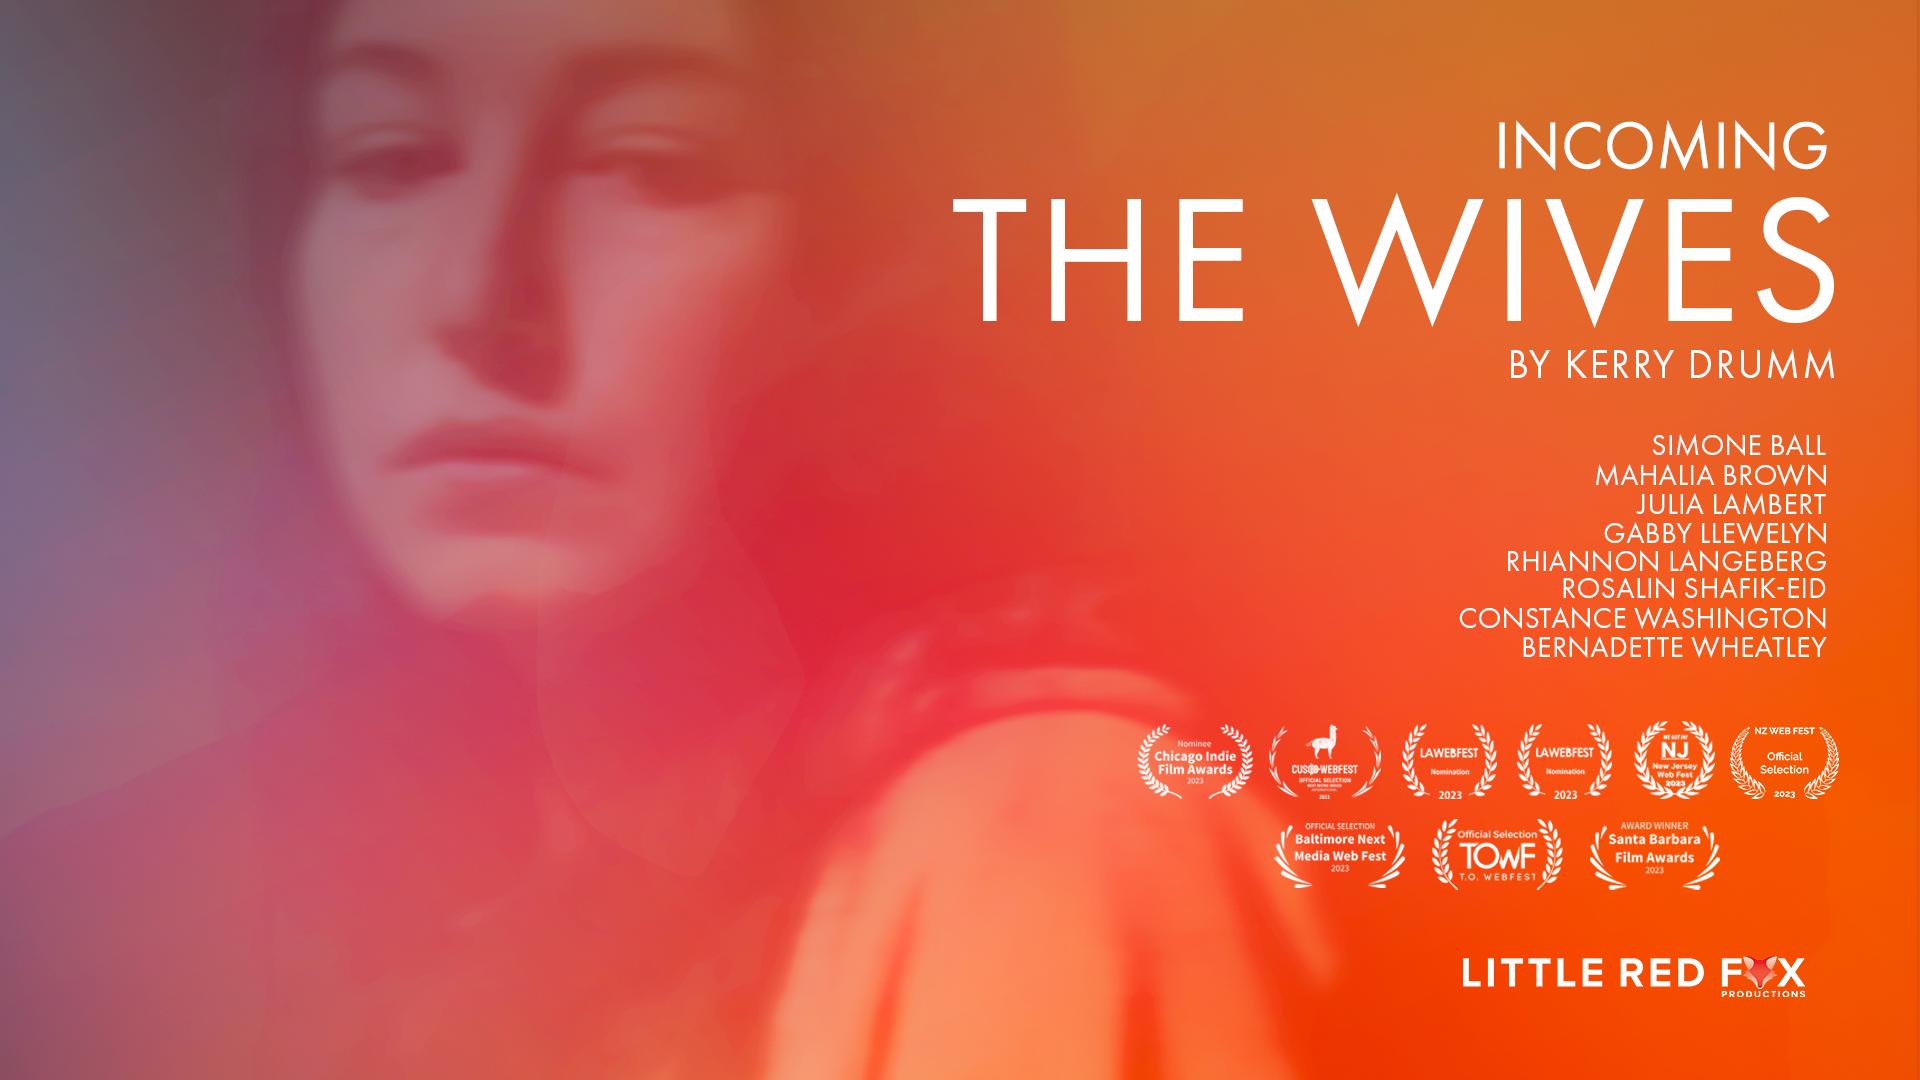 Incoming: The Wives - Episode 2: War on Love, Episode 3: NOK and Episode 4: Band of Wives